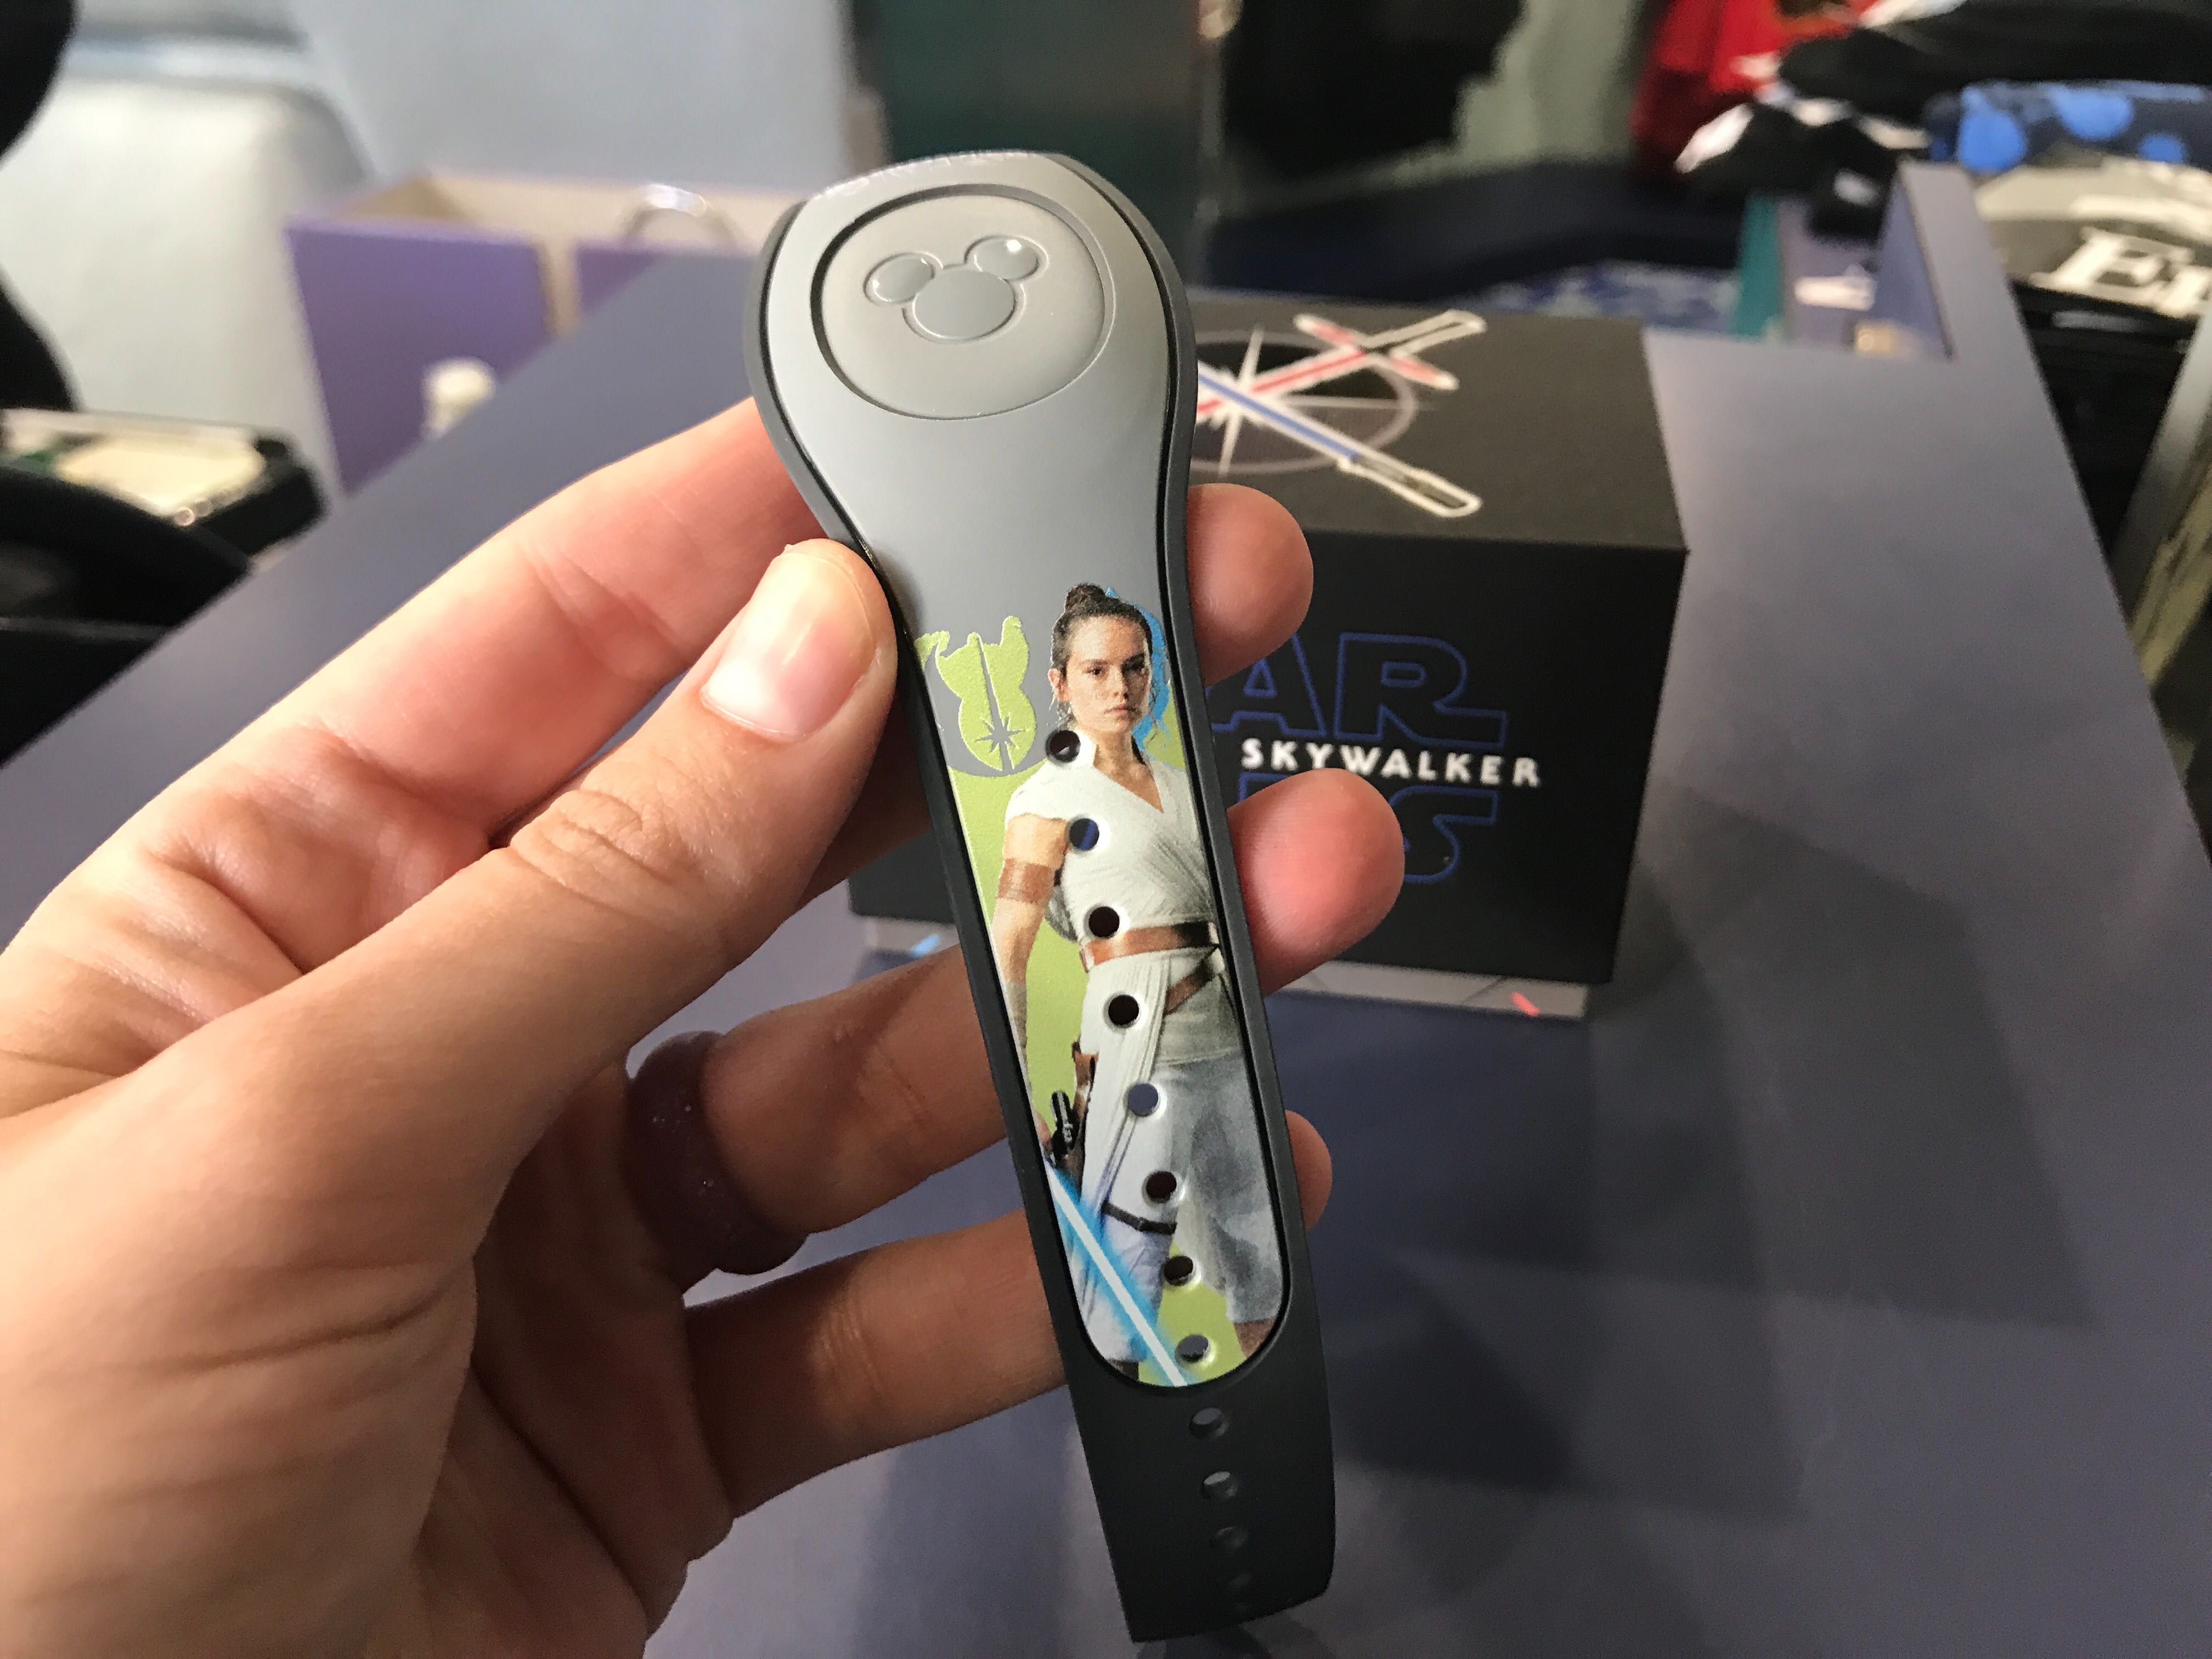 star wars rise of skywalker magicband 8